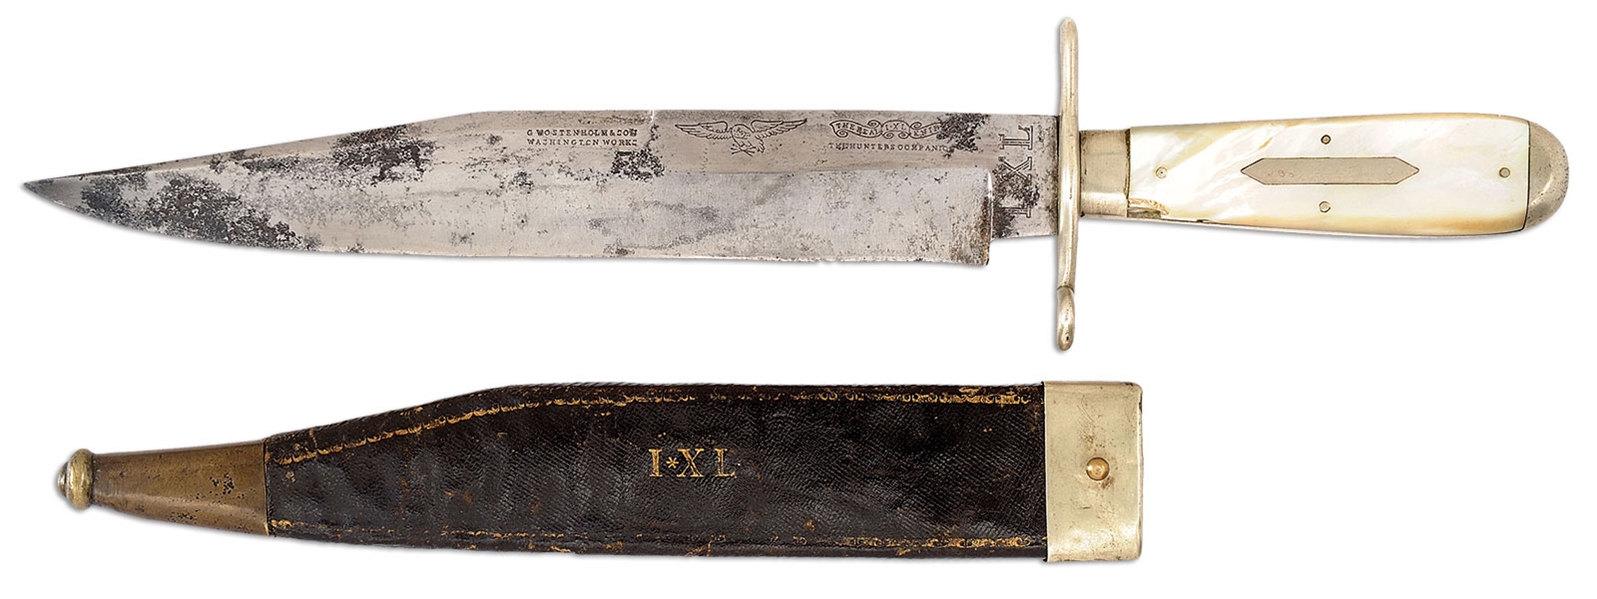 MASSIVE AND RARE CIVIL WAR ERA IXL BOWIE WITH MOTHER OF PEARL GRIP AND ORIGINAL SCABBARD.                                                                                                               